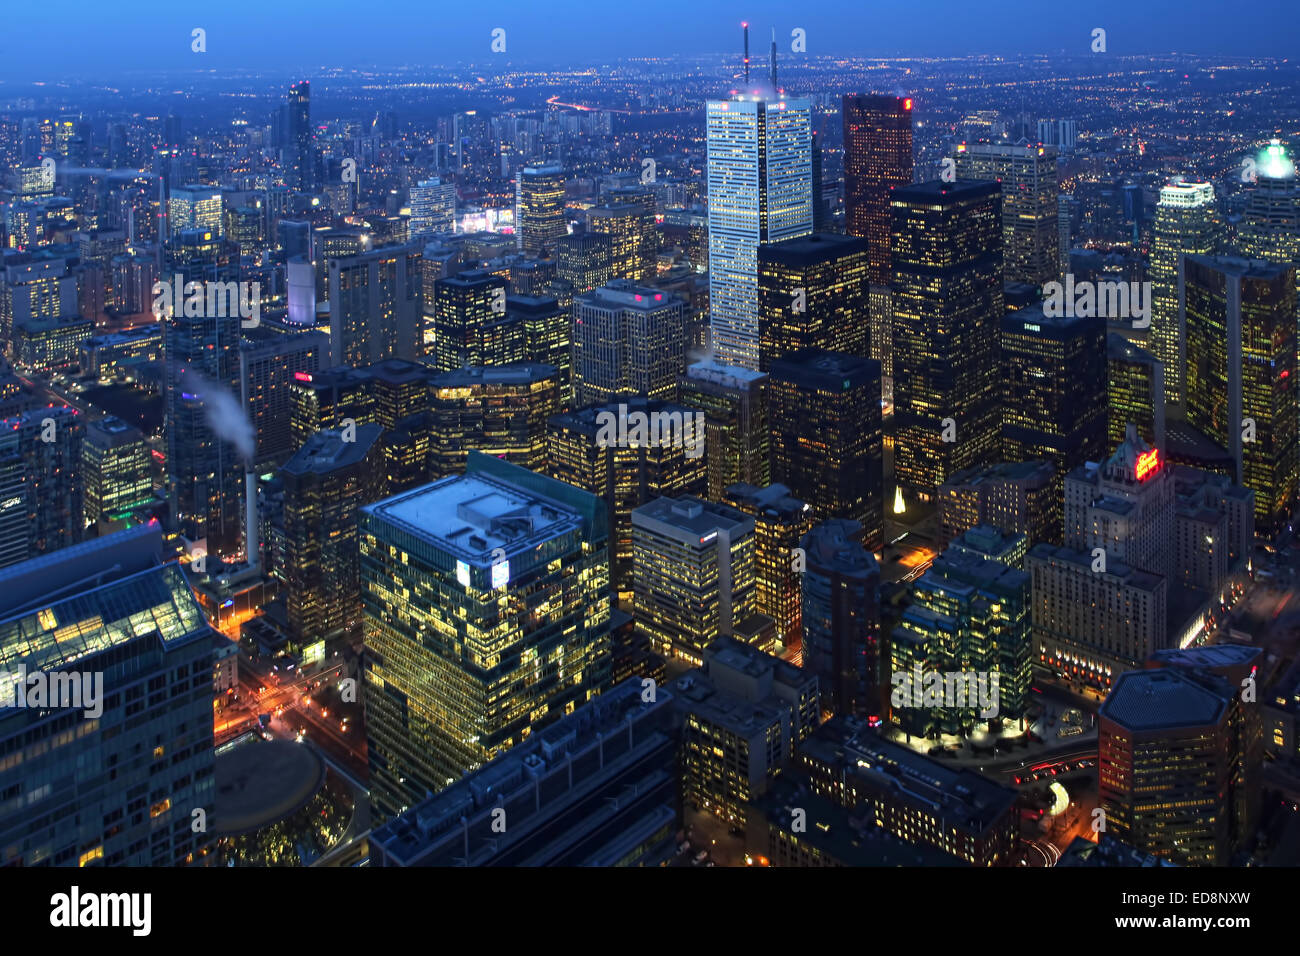 Aerial view of the heart of the city of Toronto at night Stock Photo